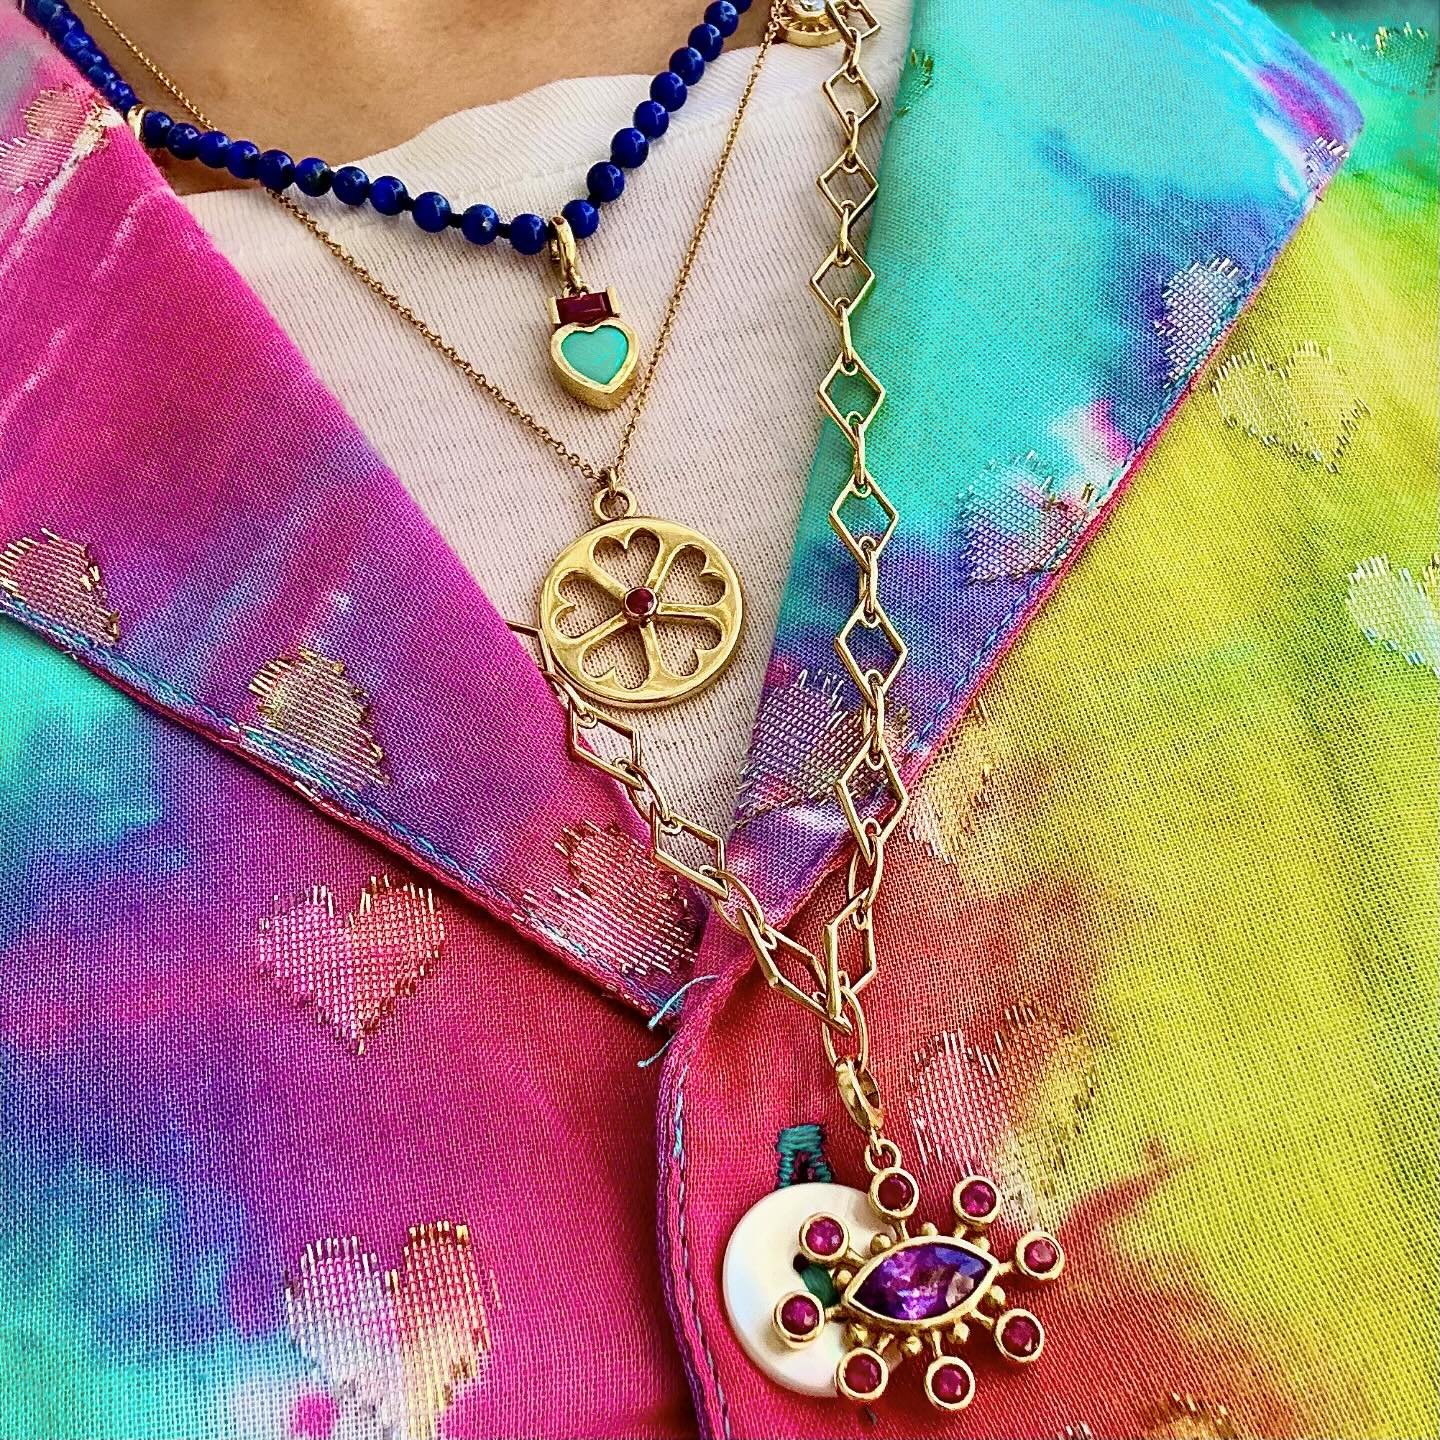 Hearts on hearts on hearts&hellip; so grateful the sunshine is back! ☀️💕 💚🧿&diams;️

#Mazahri #finejewelry #colorfuljewelry #18kgold #hearts #charms #fairmined #consciousjewelry #ethicalfashion #sustainability #ethicaljewelry #socalstyle